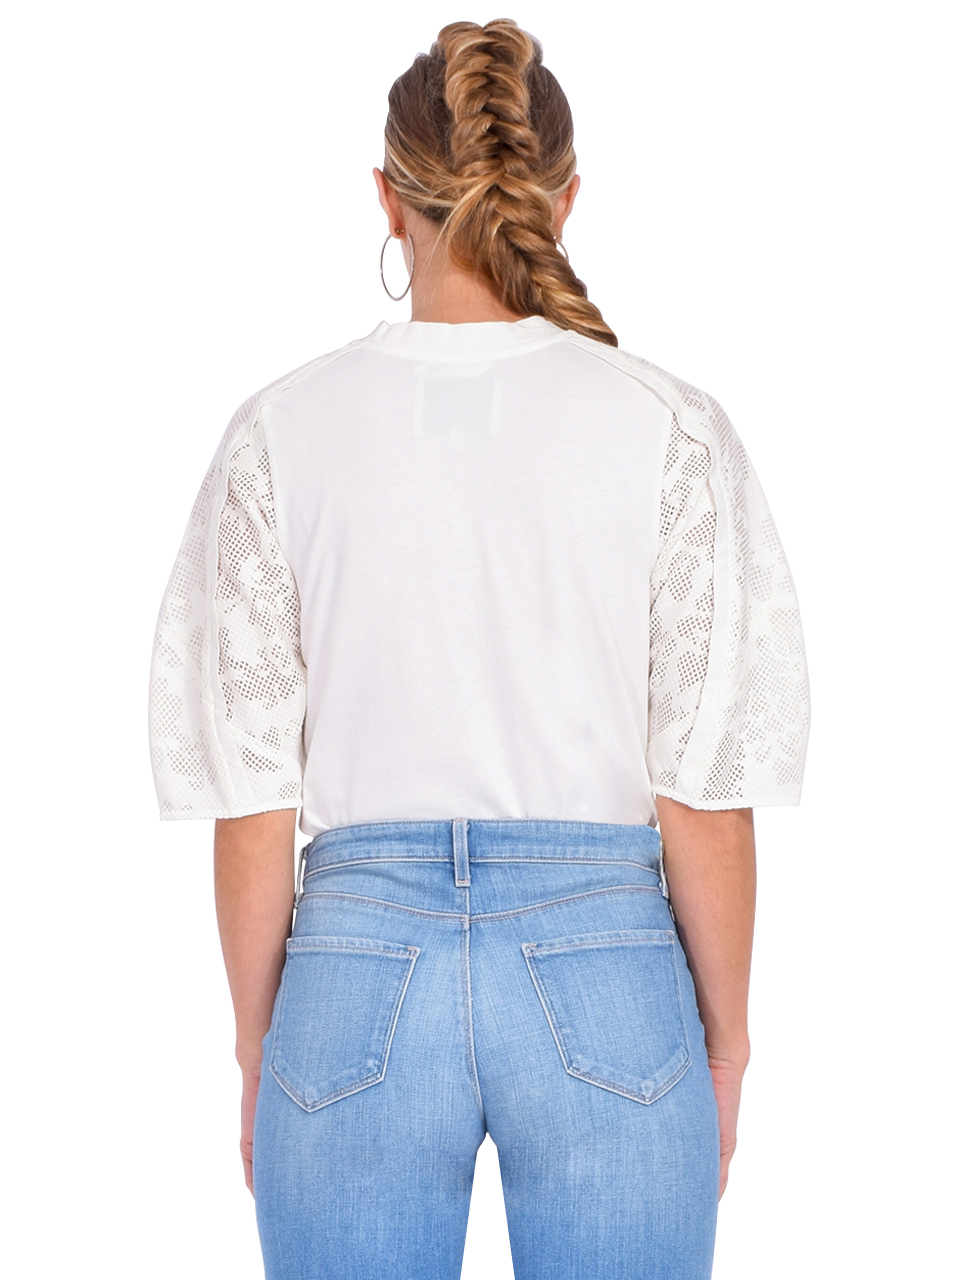 3.1 Phillip Lim Bonded Lace Combo T-Shirt in White Back View 